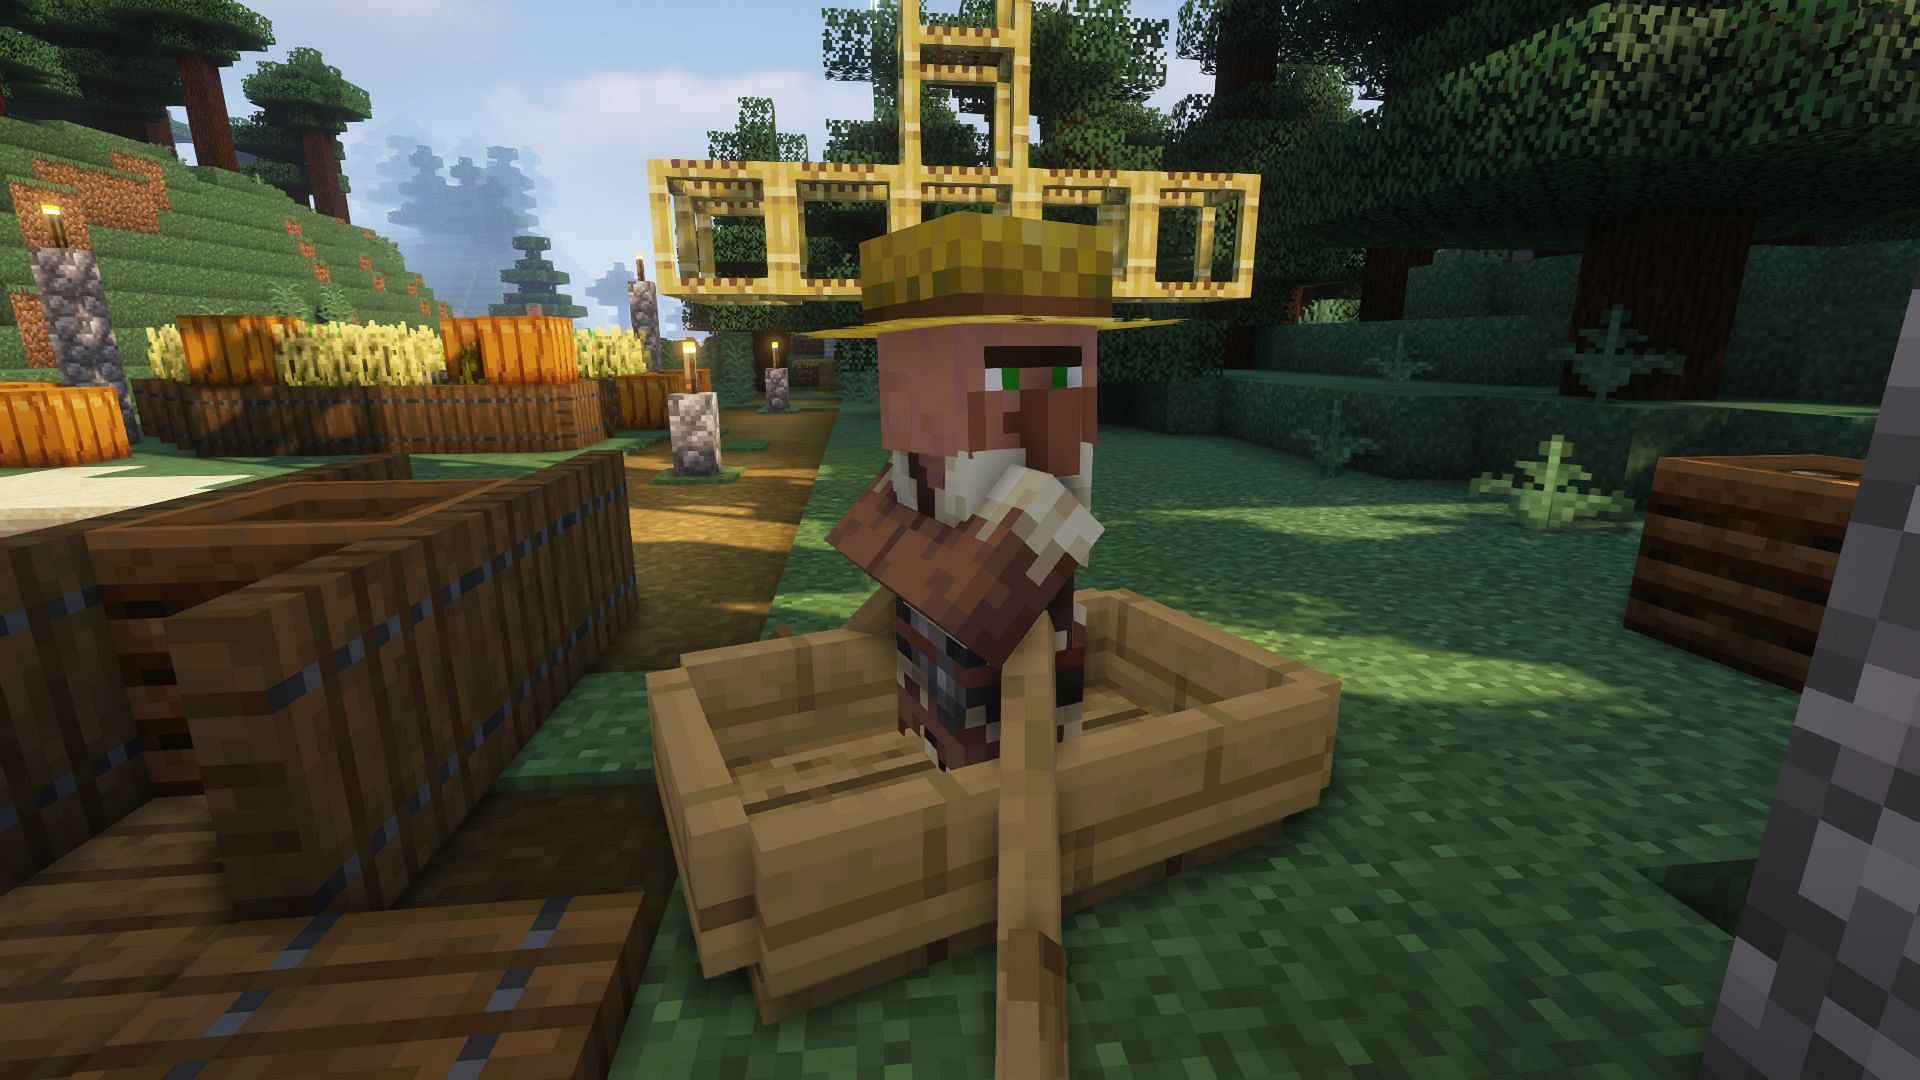 Boats can be operated with a villager sitting in it (Image via Minecraft)